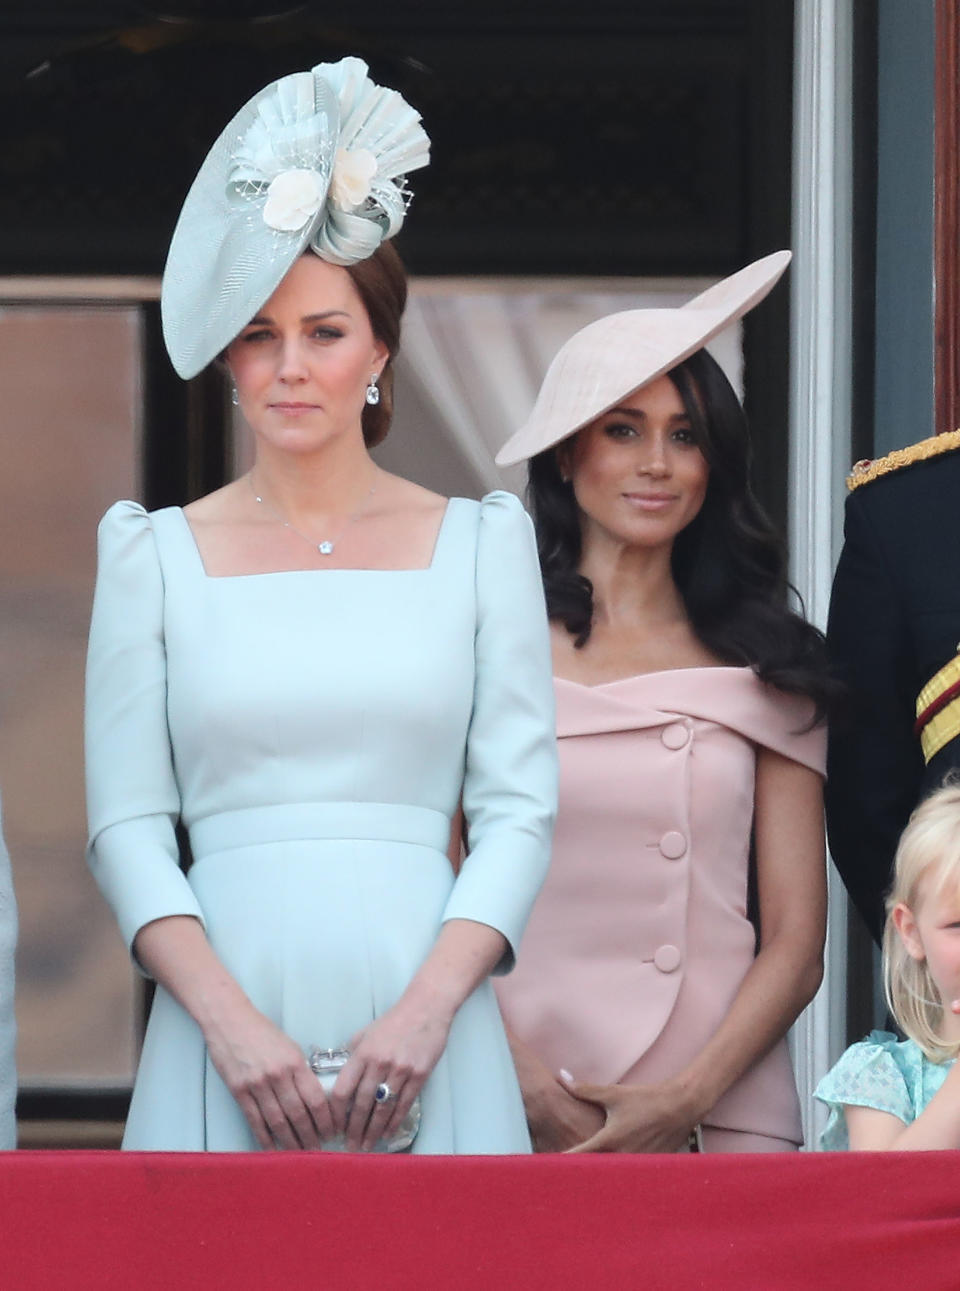 Kate Middleton, the Duchess of Cambridge, and Meghan Markle, Duchess of Sussex, on the balcony of Buckingham Palace during Trooping The Colour on June 9, 2018 in London, England